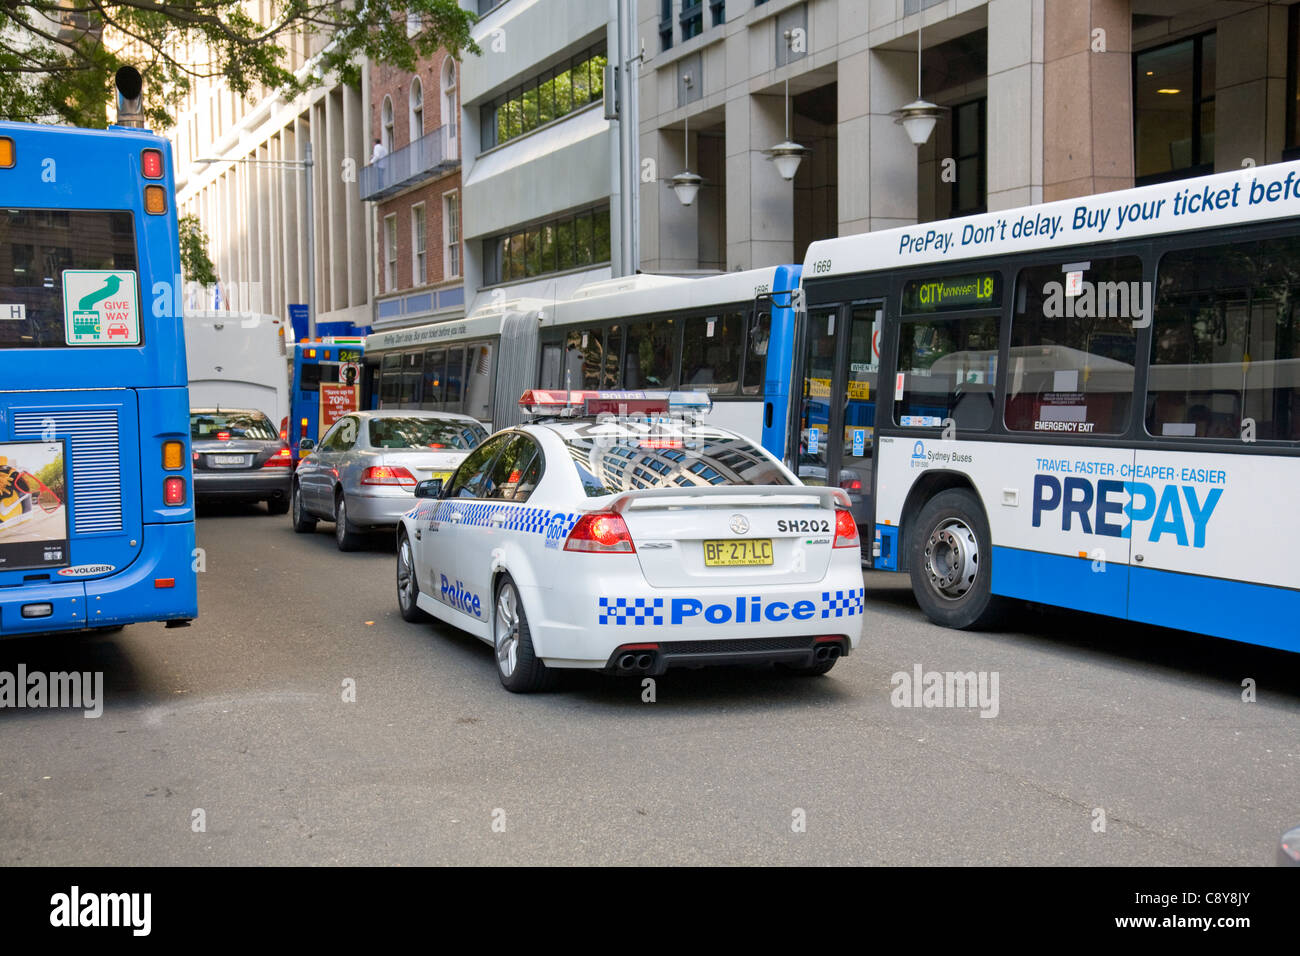 Australian nsw police car driving between stationary buses in Sydney city centre, NSW,,Australia Stock Photo